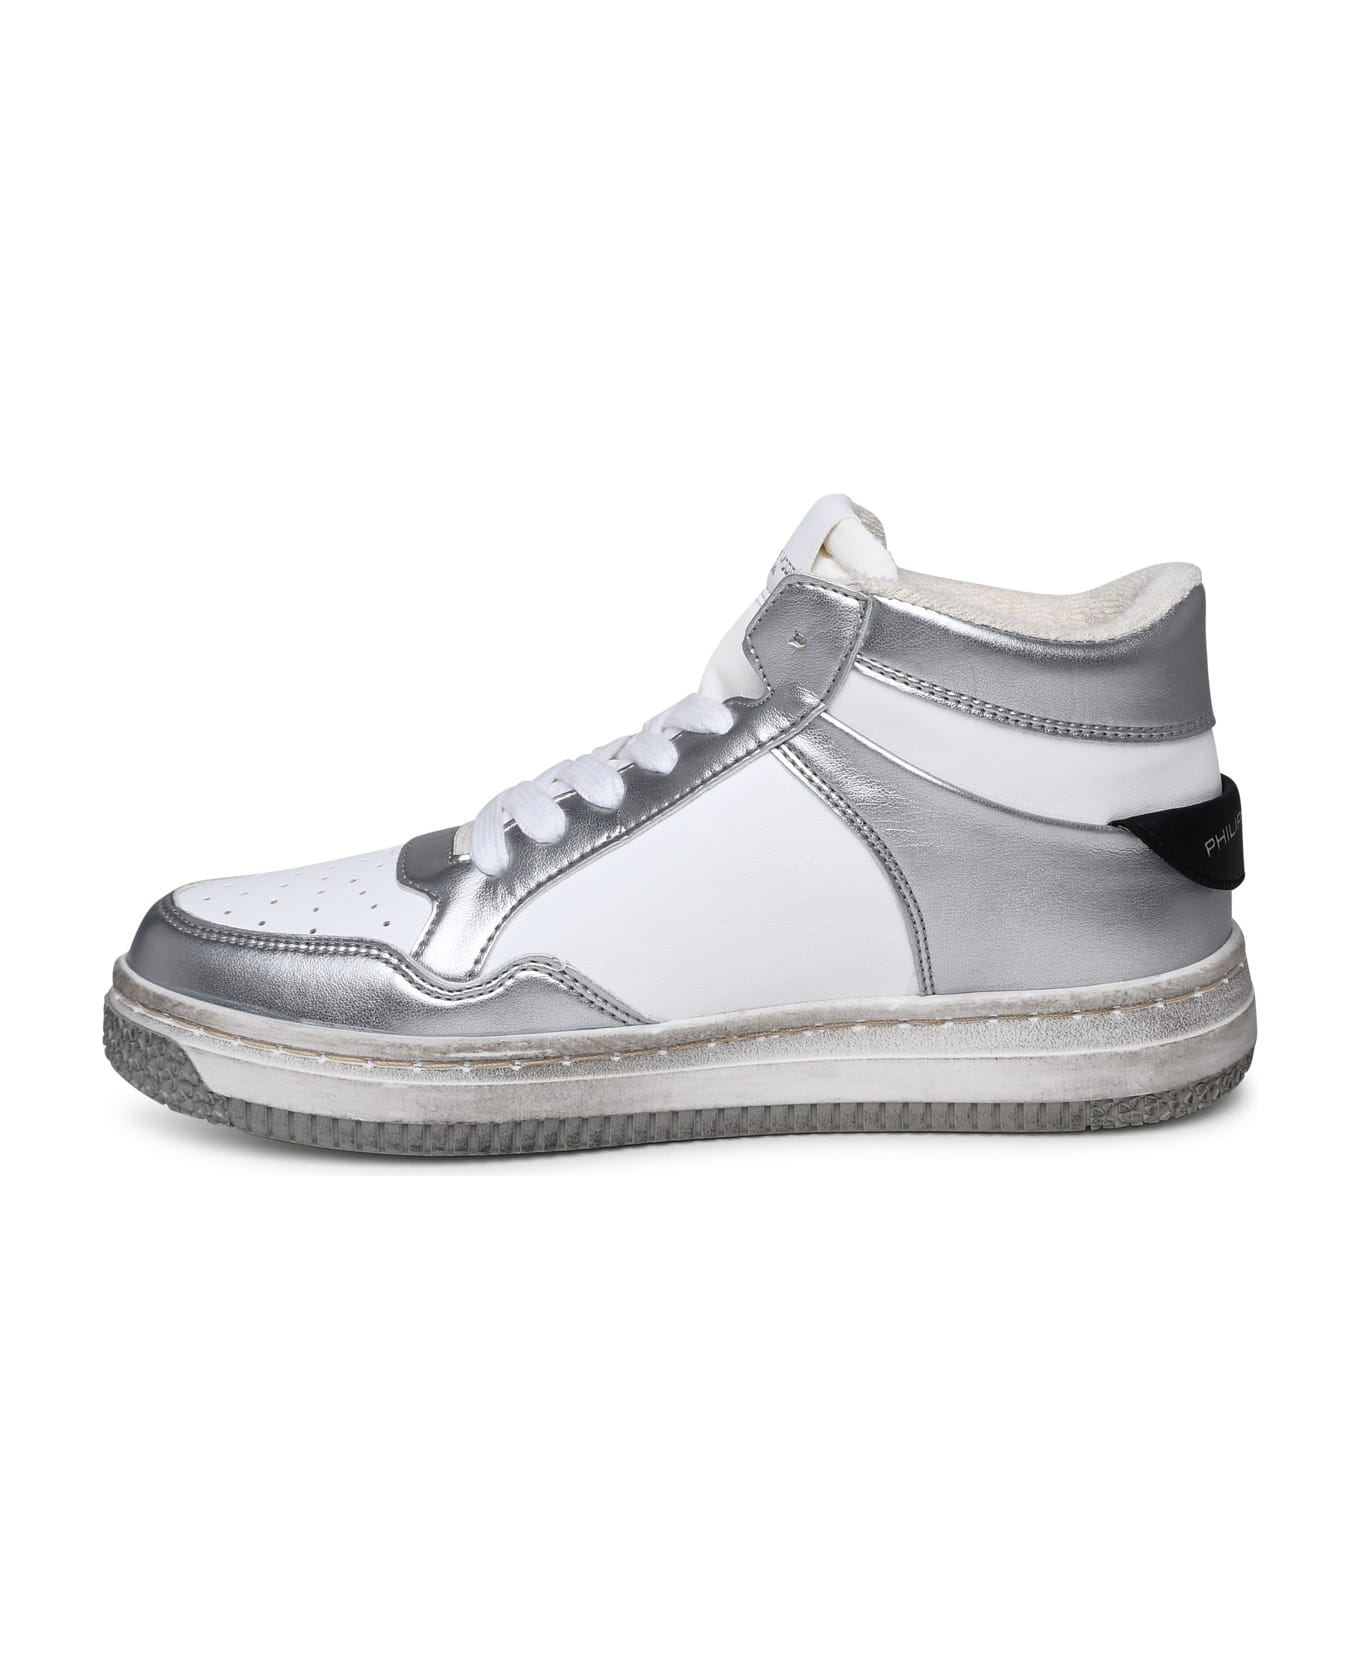 Philippe Model Lion Sneakers In Two-tone Polyurethane Blend - Silver スニーカー